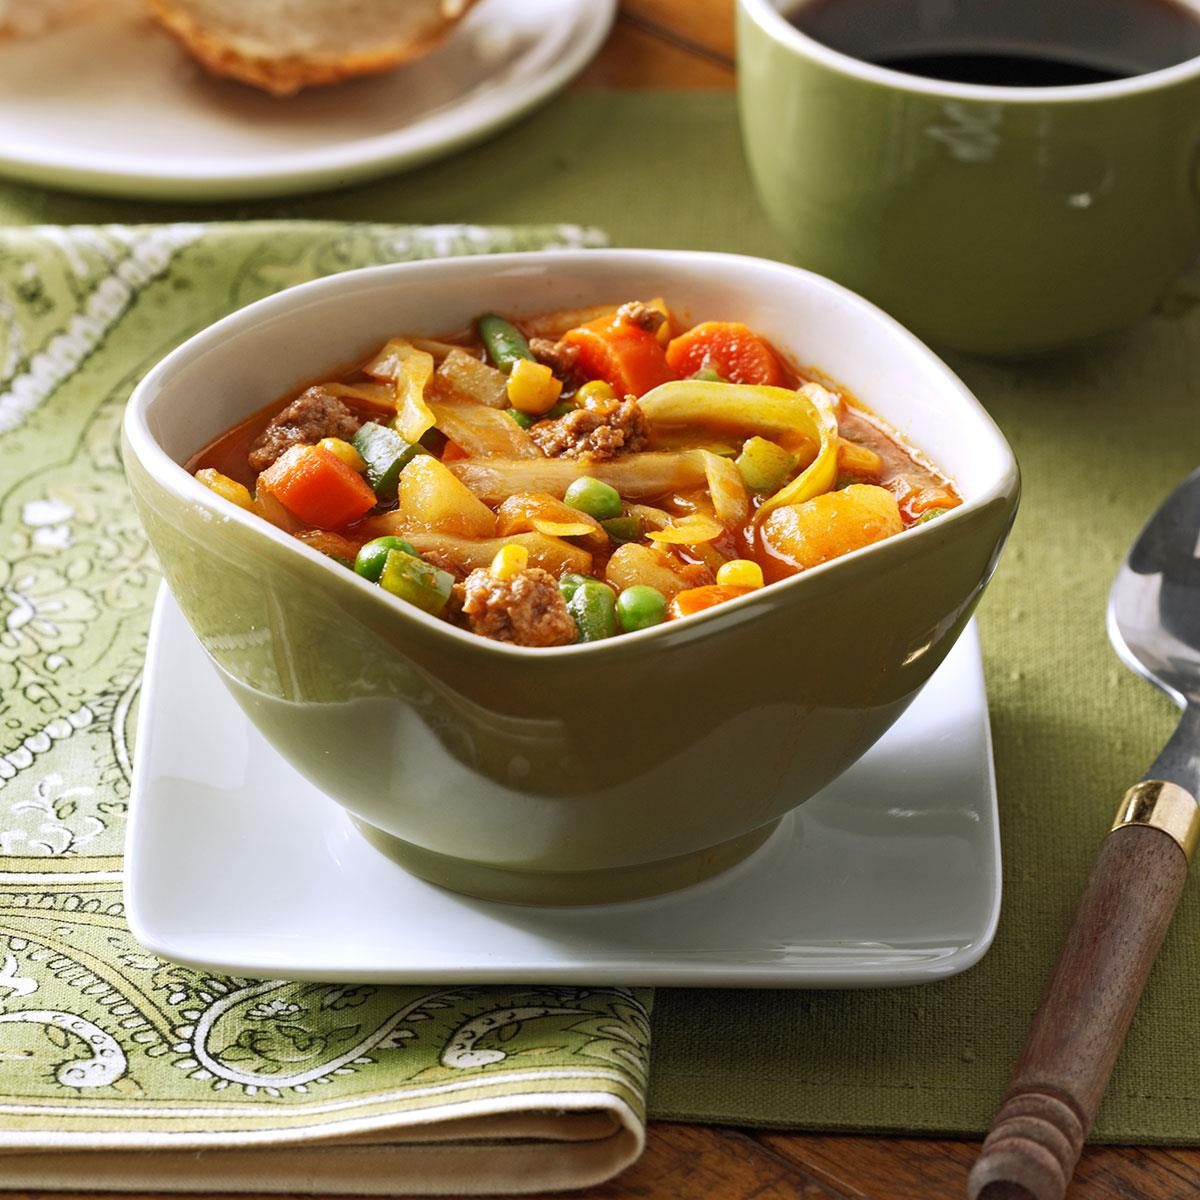 German Vegetable Soup Recipe: How to Make It